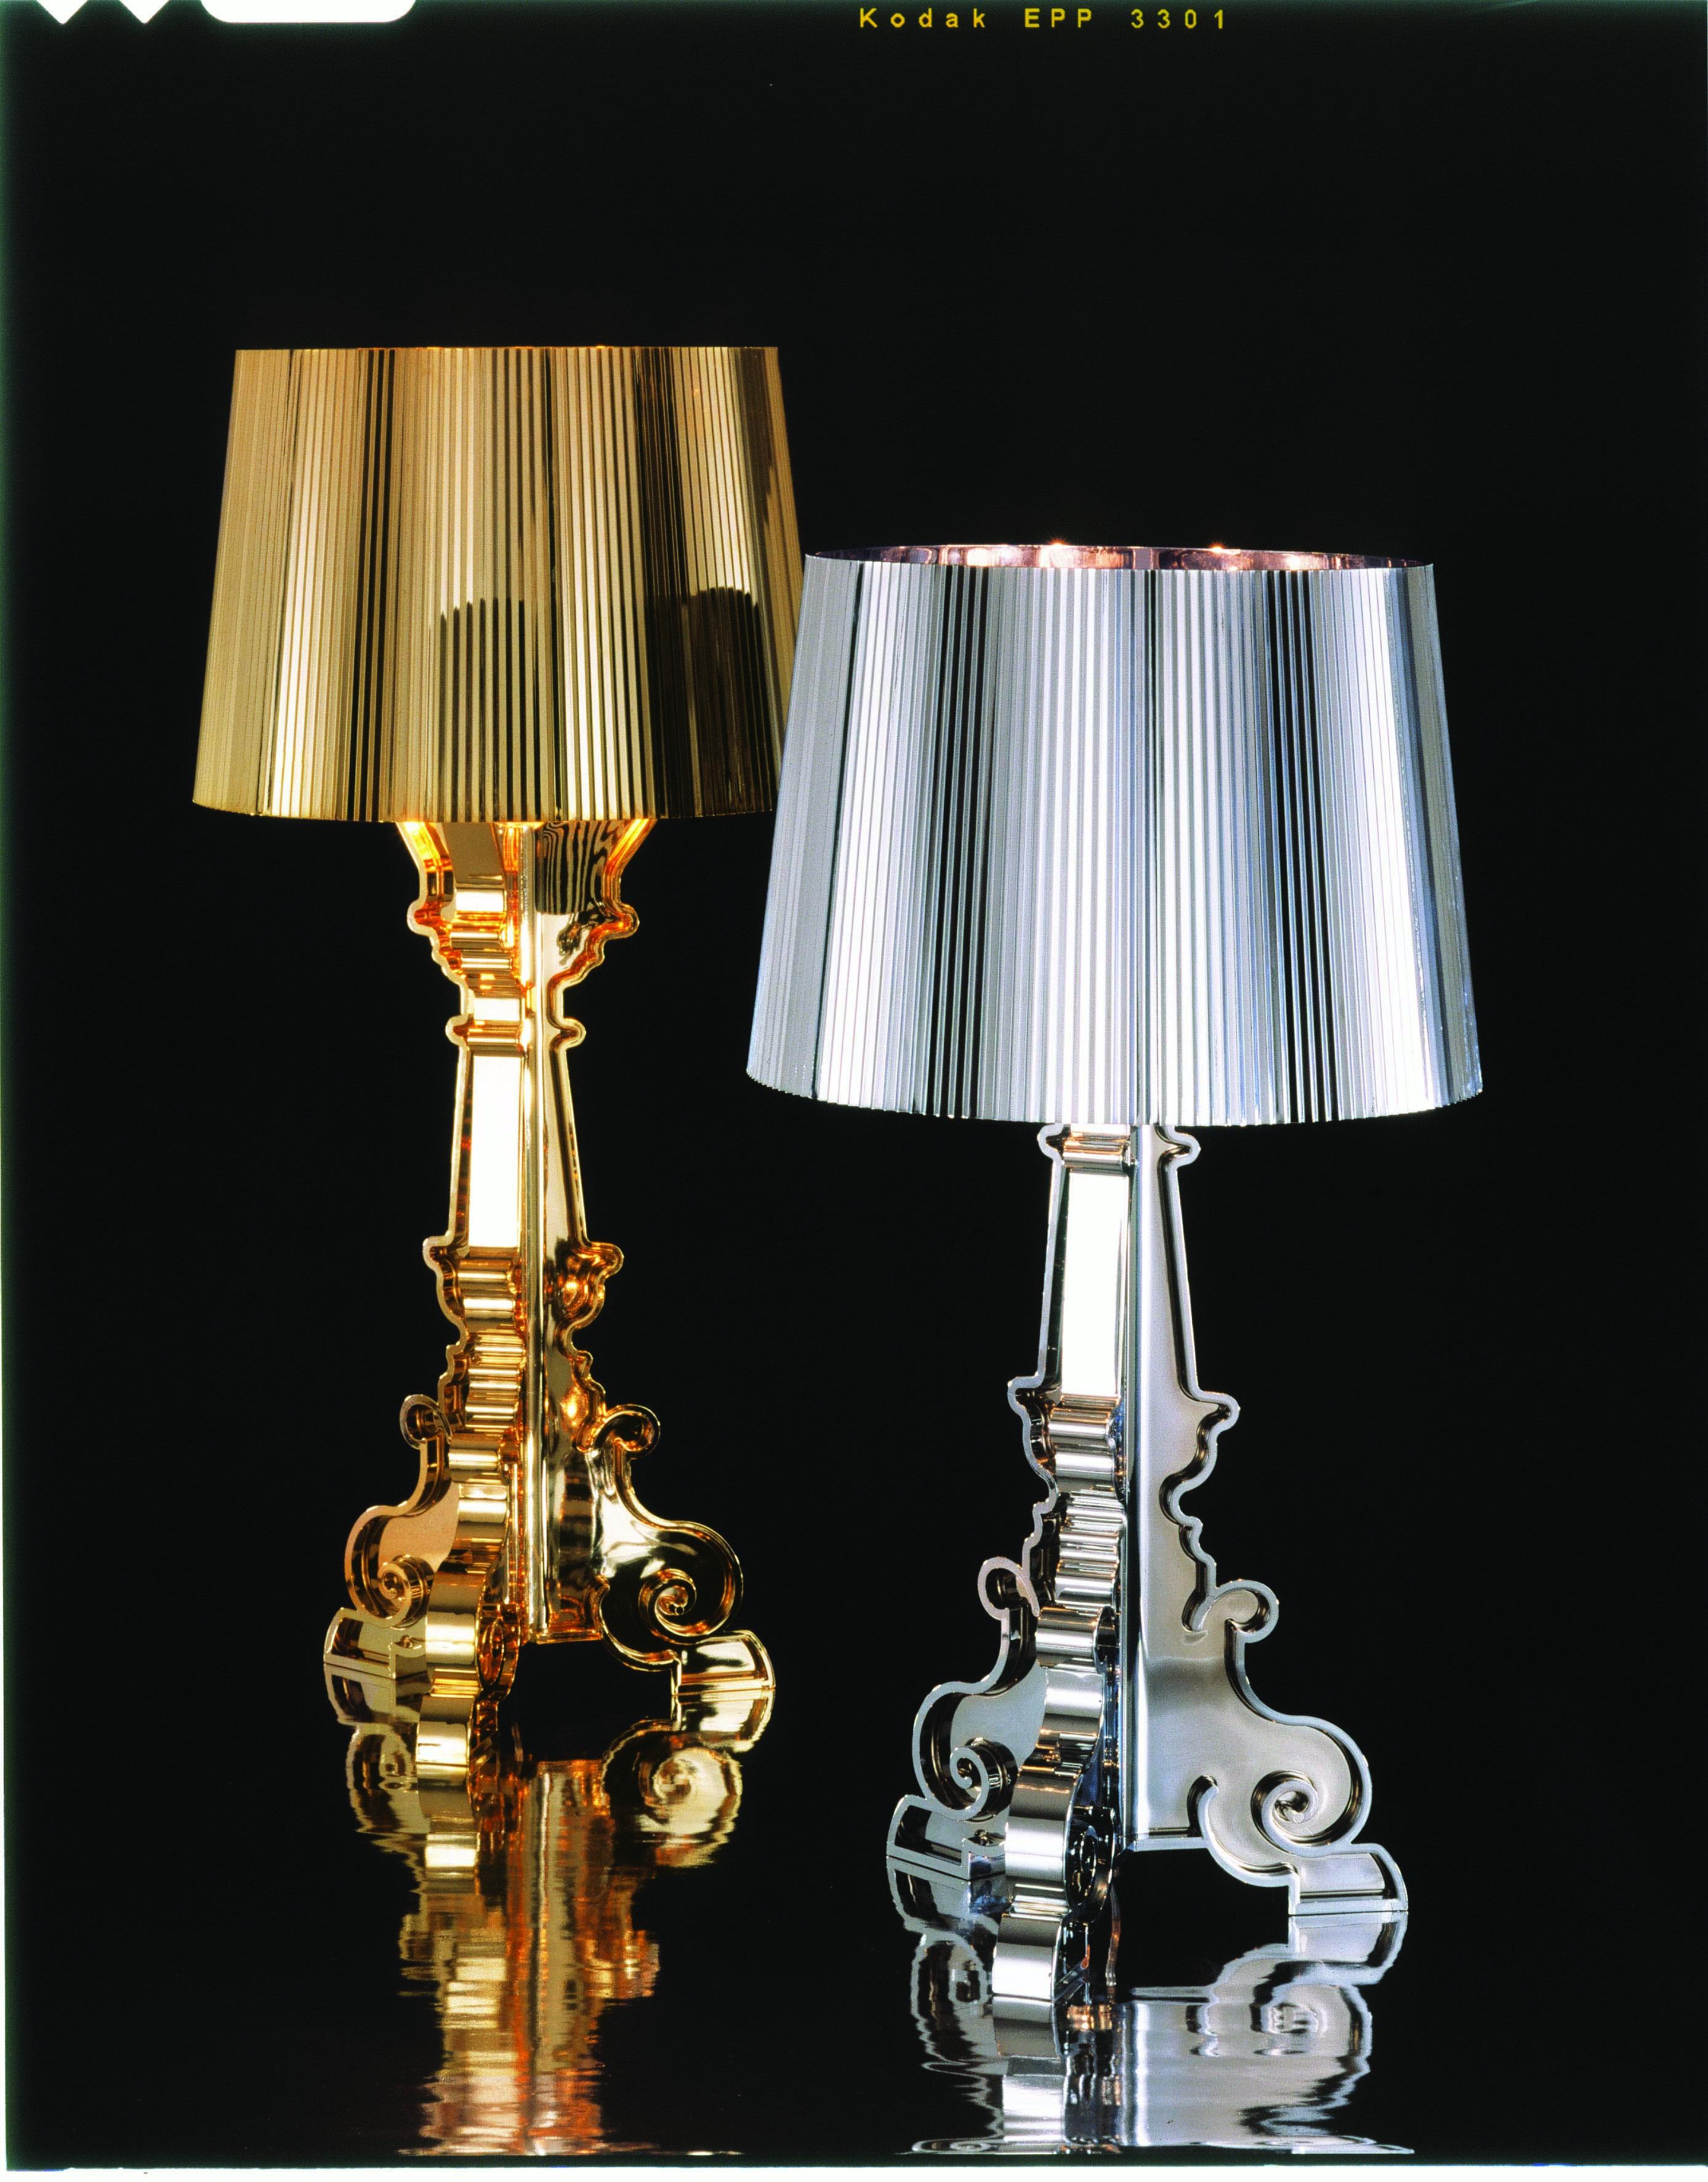 A lamp with an inimitable style, Bourgie is one of Kartell’s best sellers, skillfully combining classic style, richness and tradition with innovation and irony. The baroque style base is composed of three interconnecting decorated layers, while the